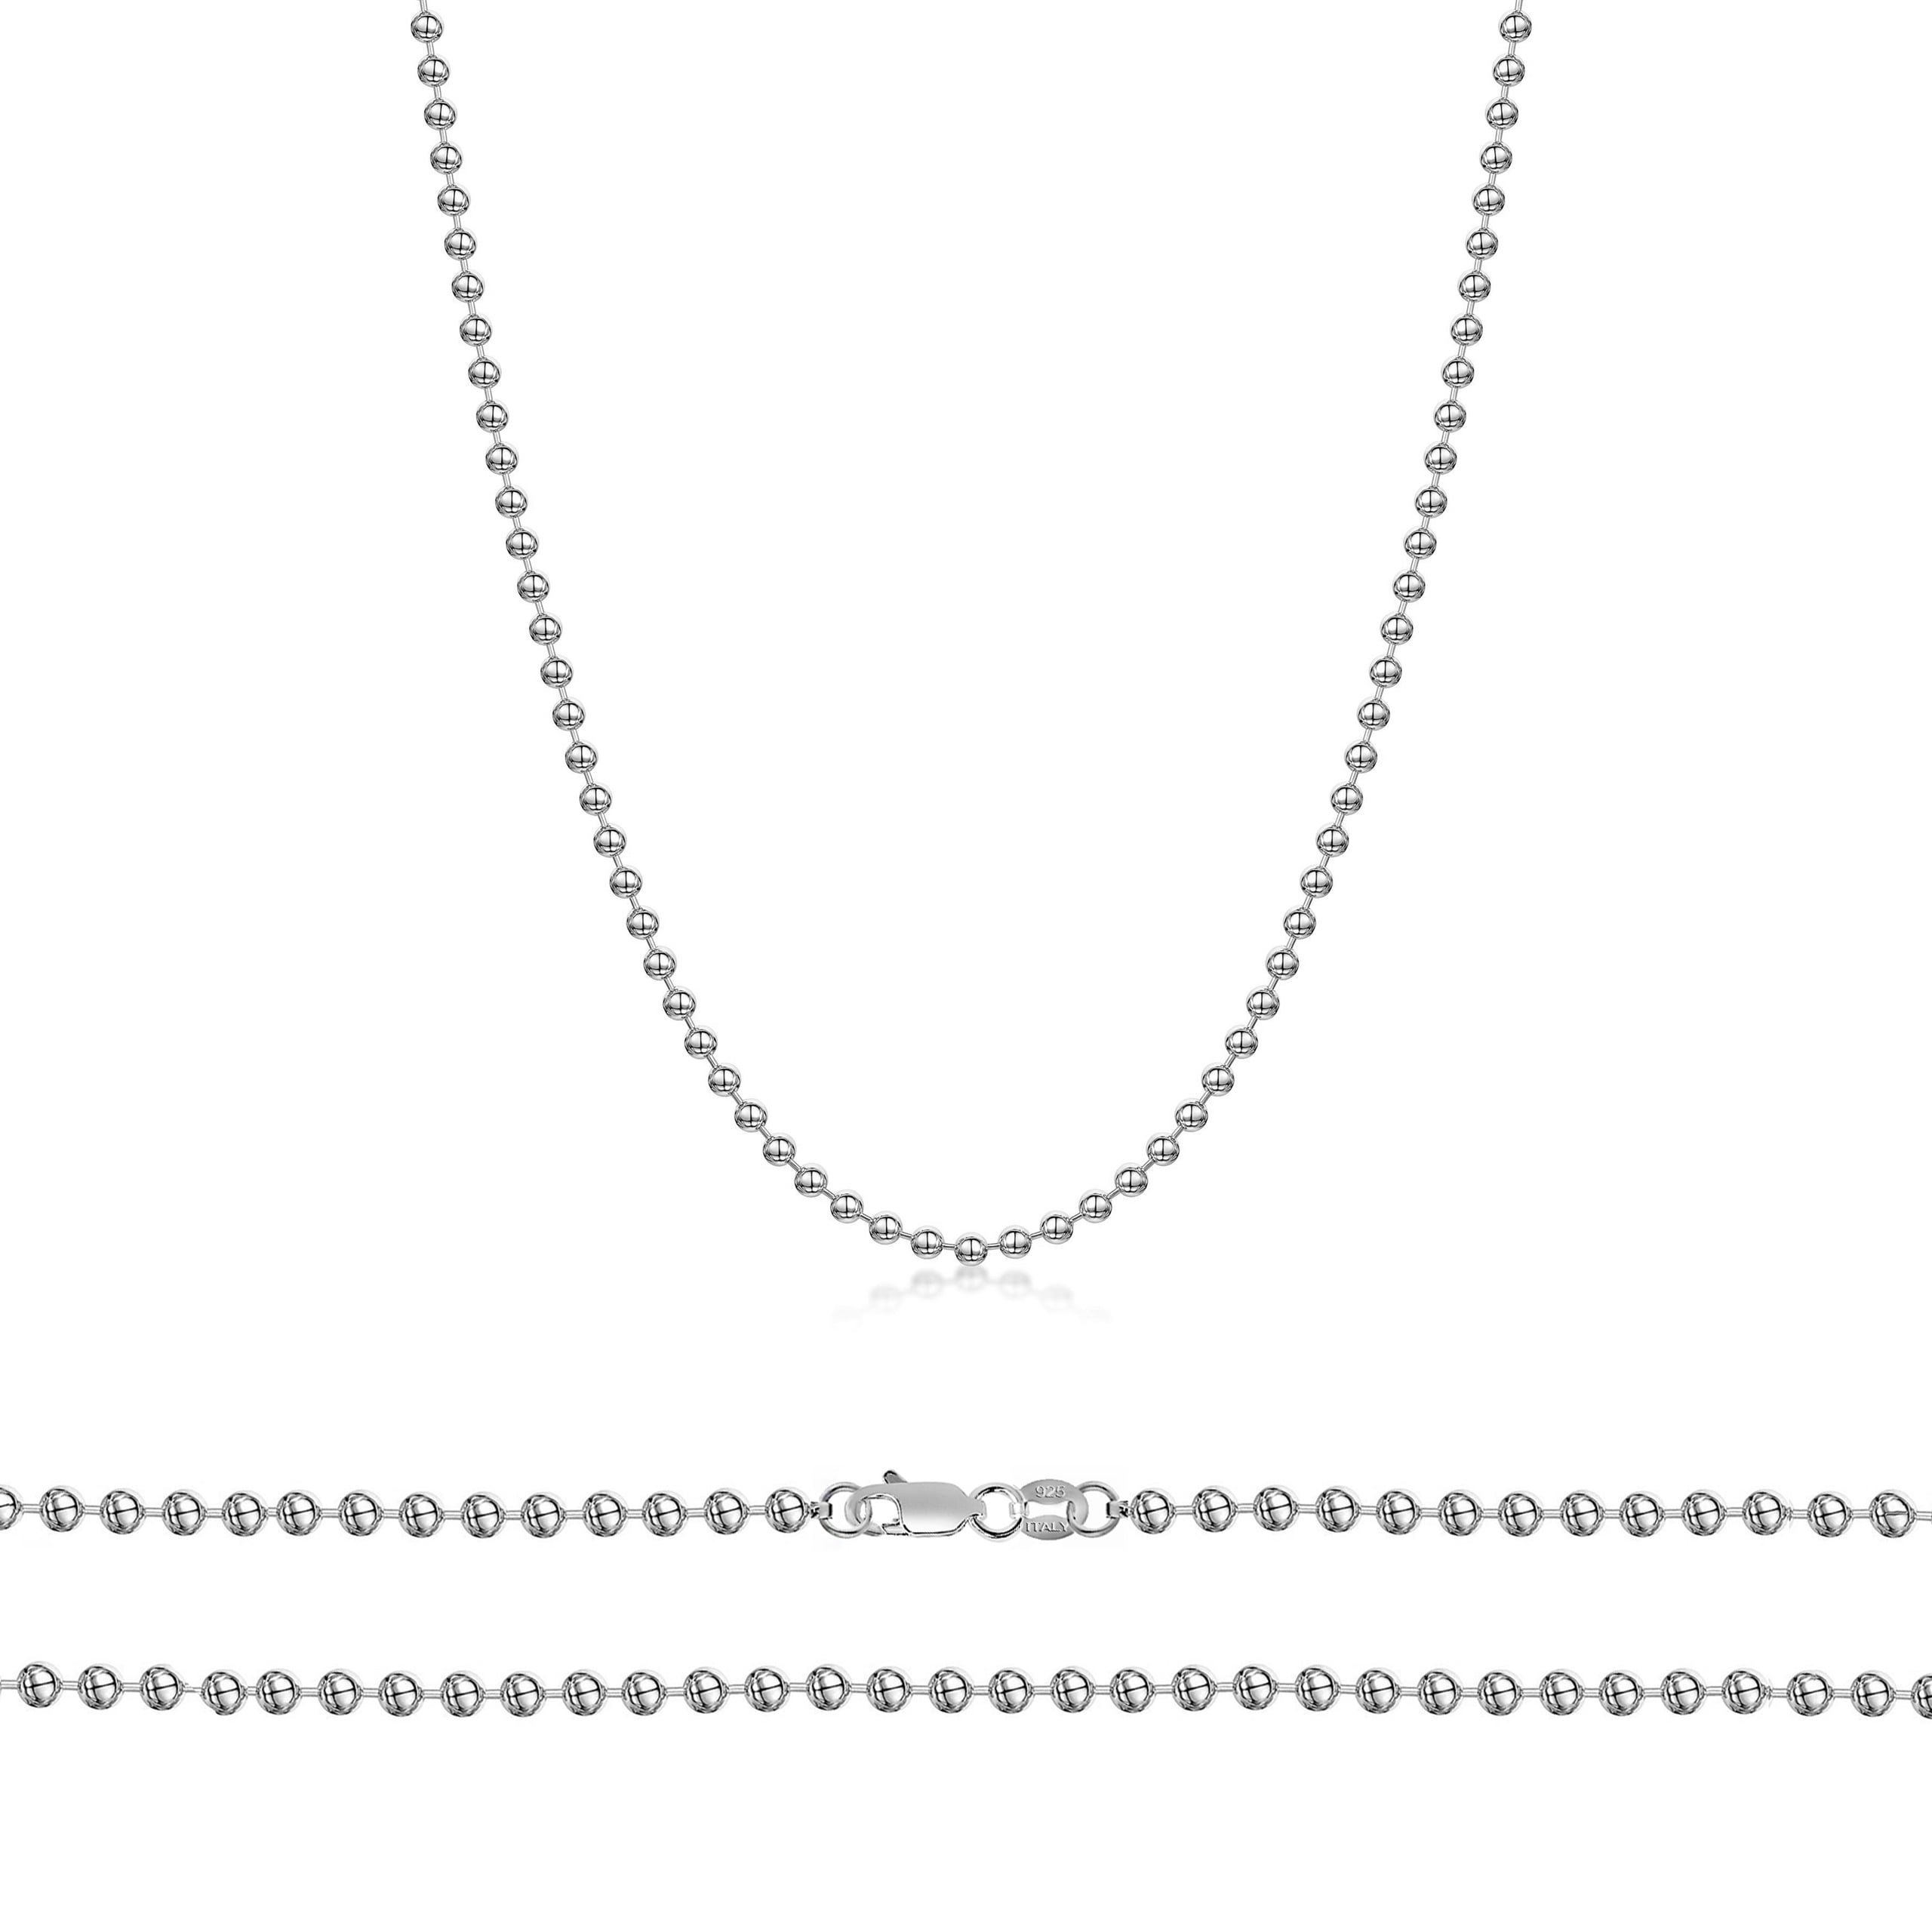 3MM 925 Sterling Silver Oval Bead Necklace 2.3MM 4MM Sterling Silver Bead Ball Necklace Rice Bead Chain Necklace,14K Gold Plated Sterling Silver Necklace 